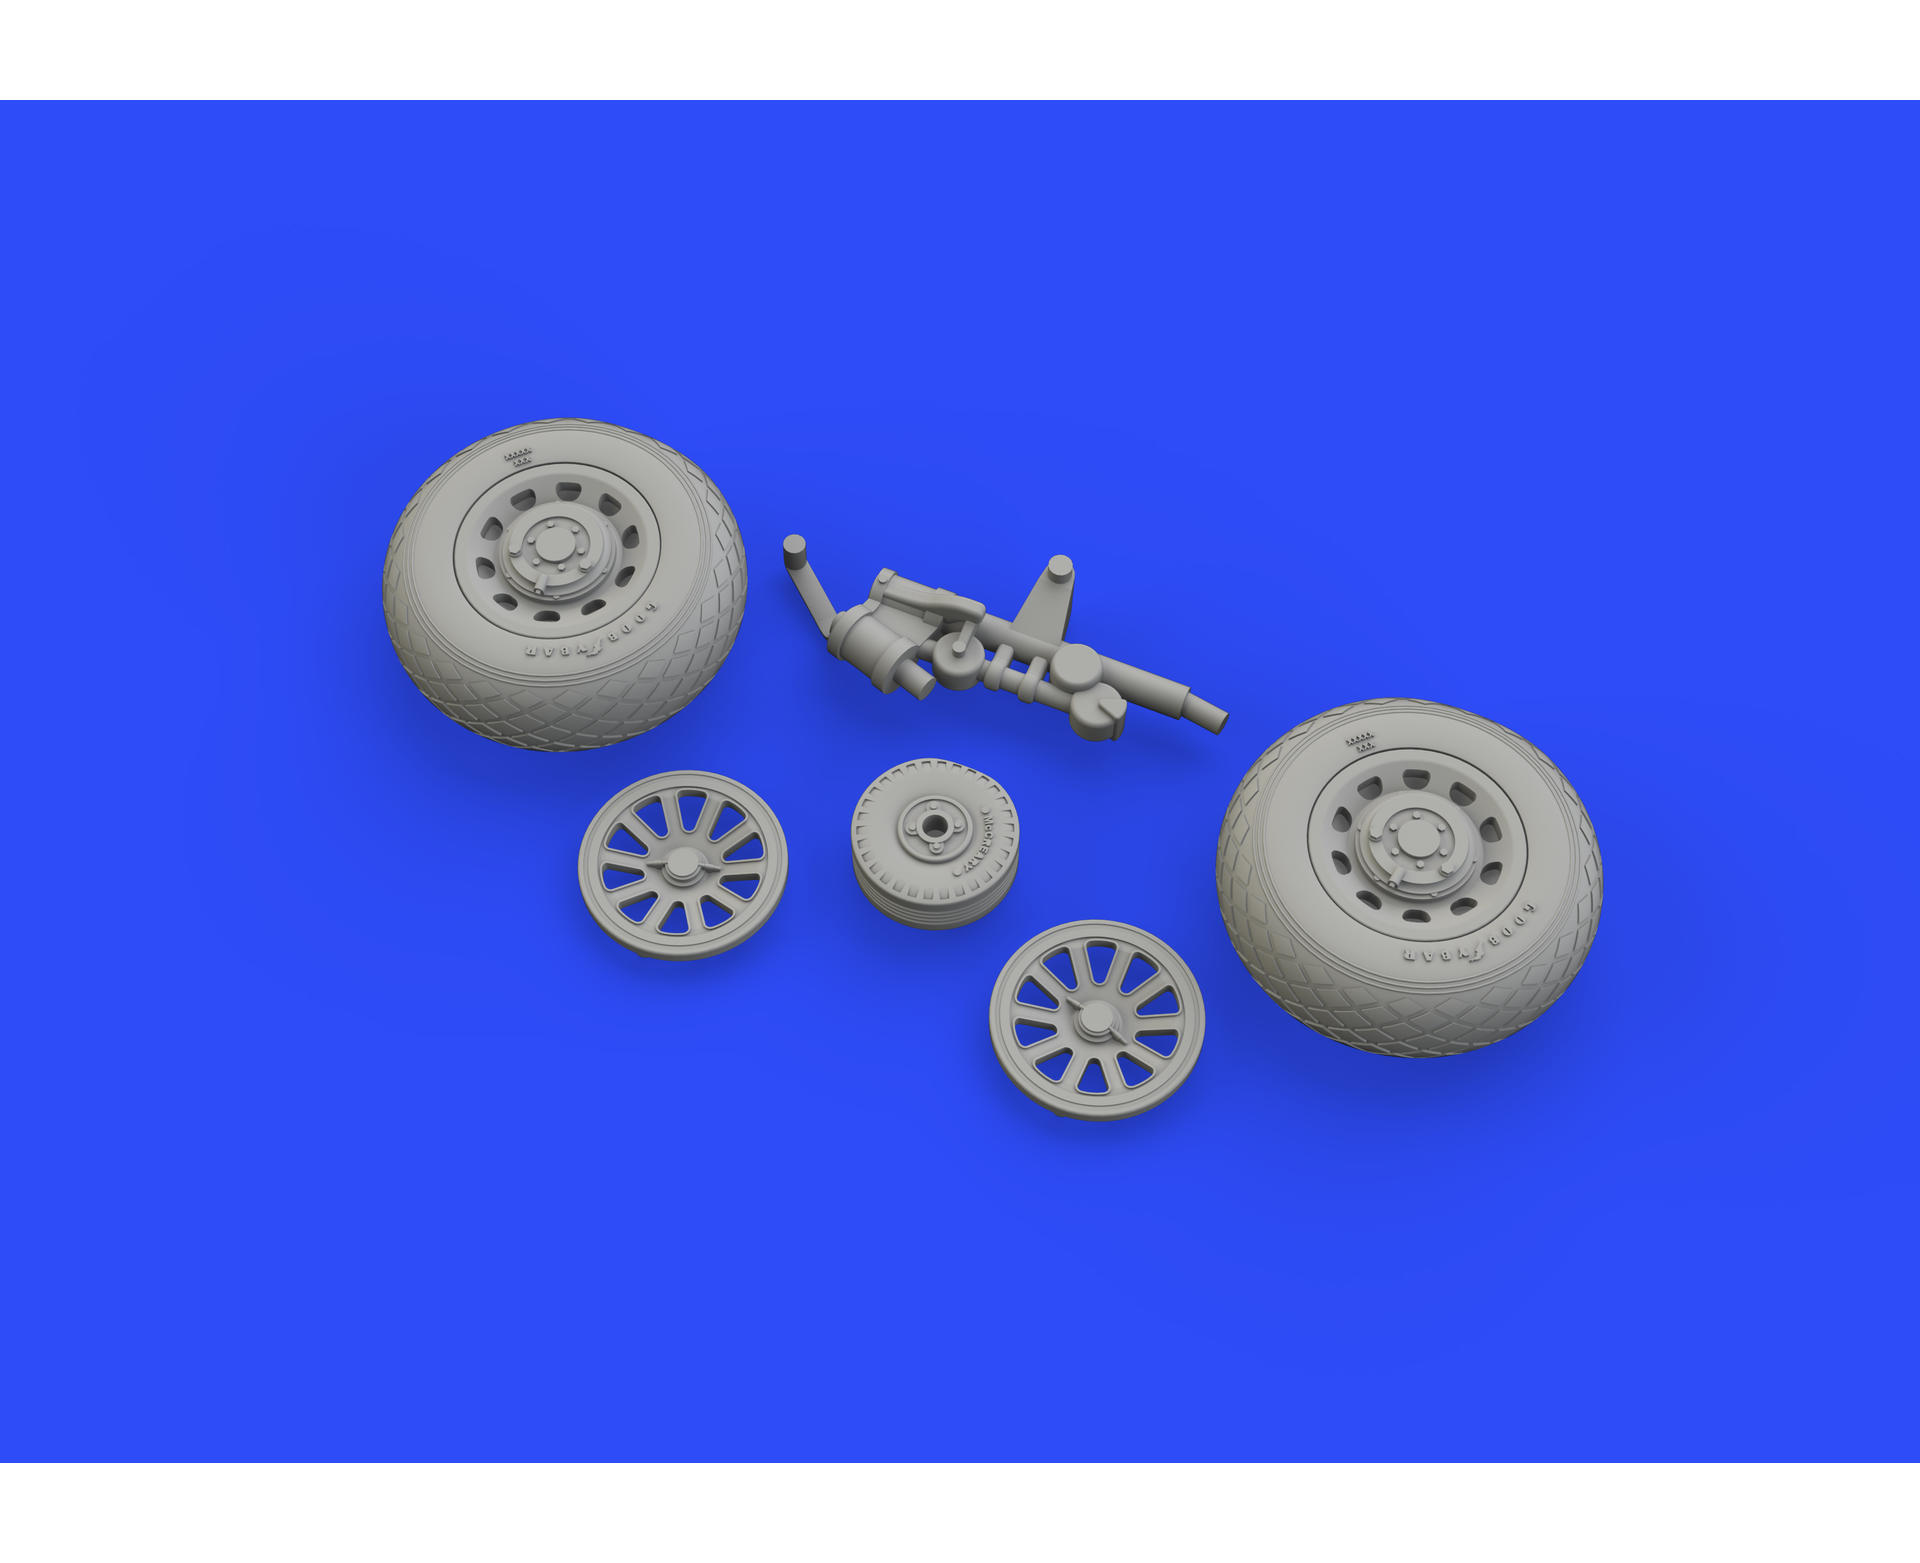 EDUARD 1/48 AIRCRAFT 648258 P38 WHEELS FOR ACY PHOTO-ETCH & RESIN